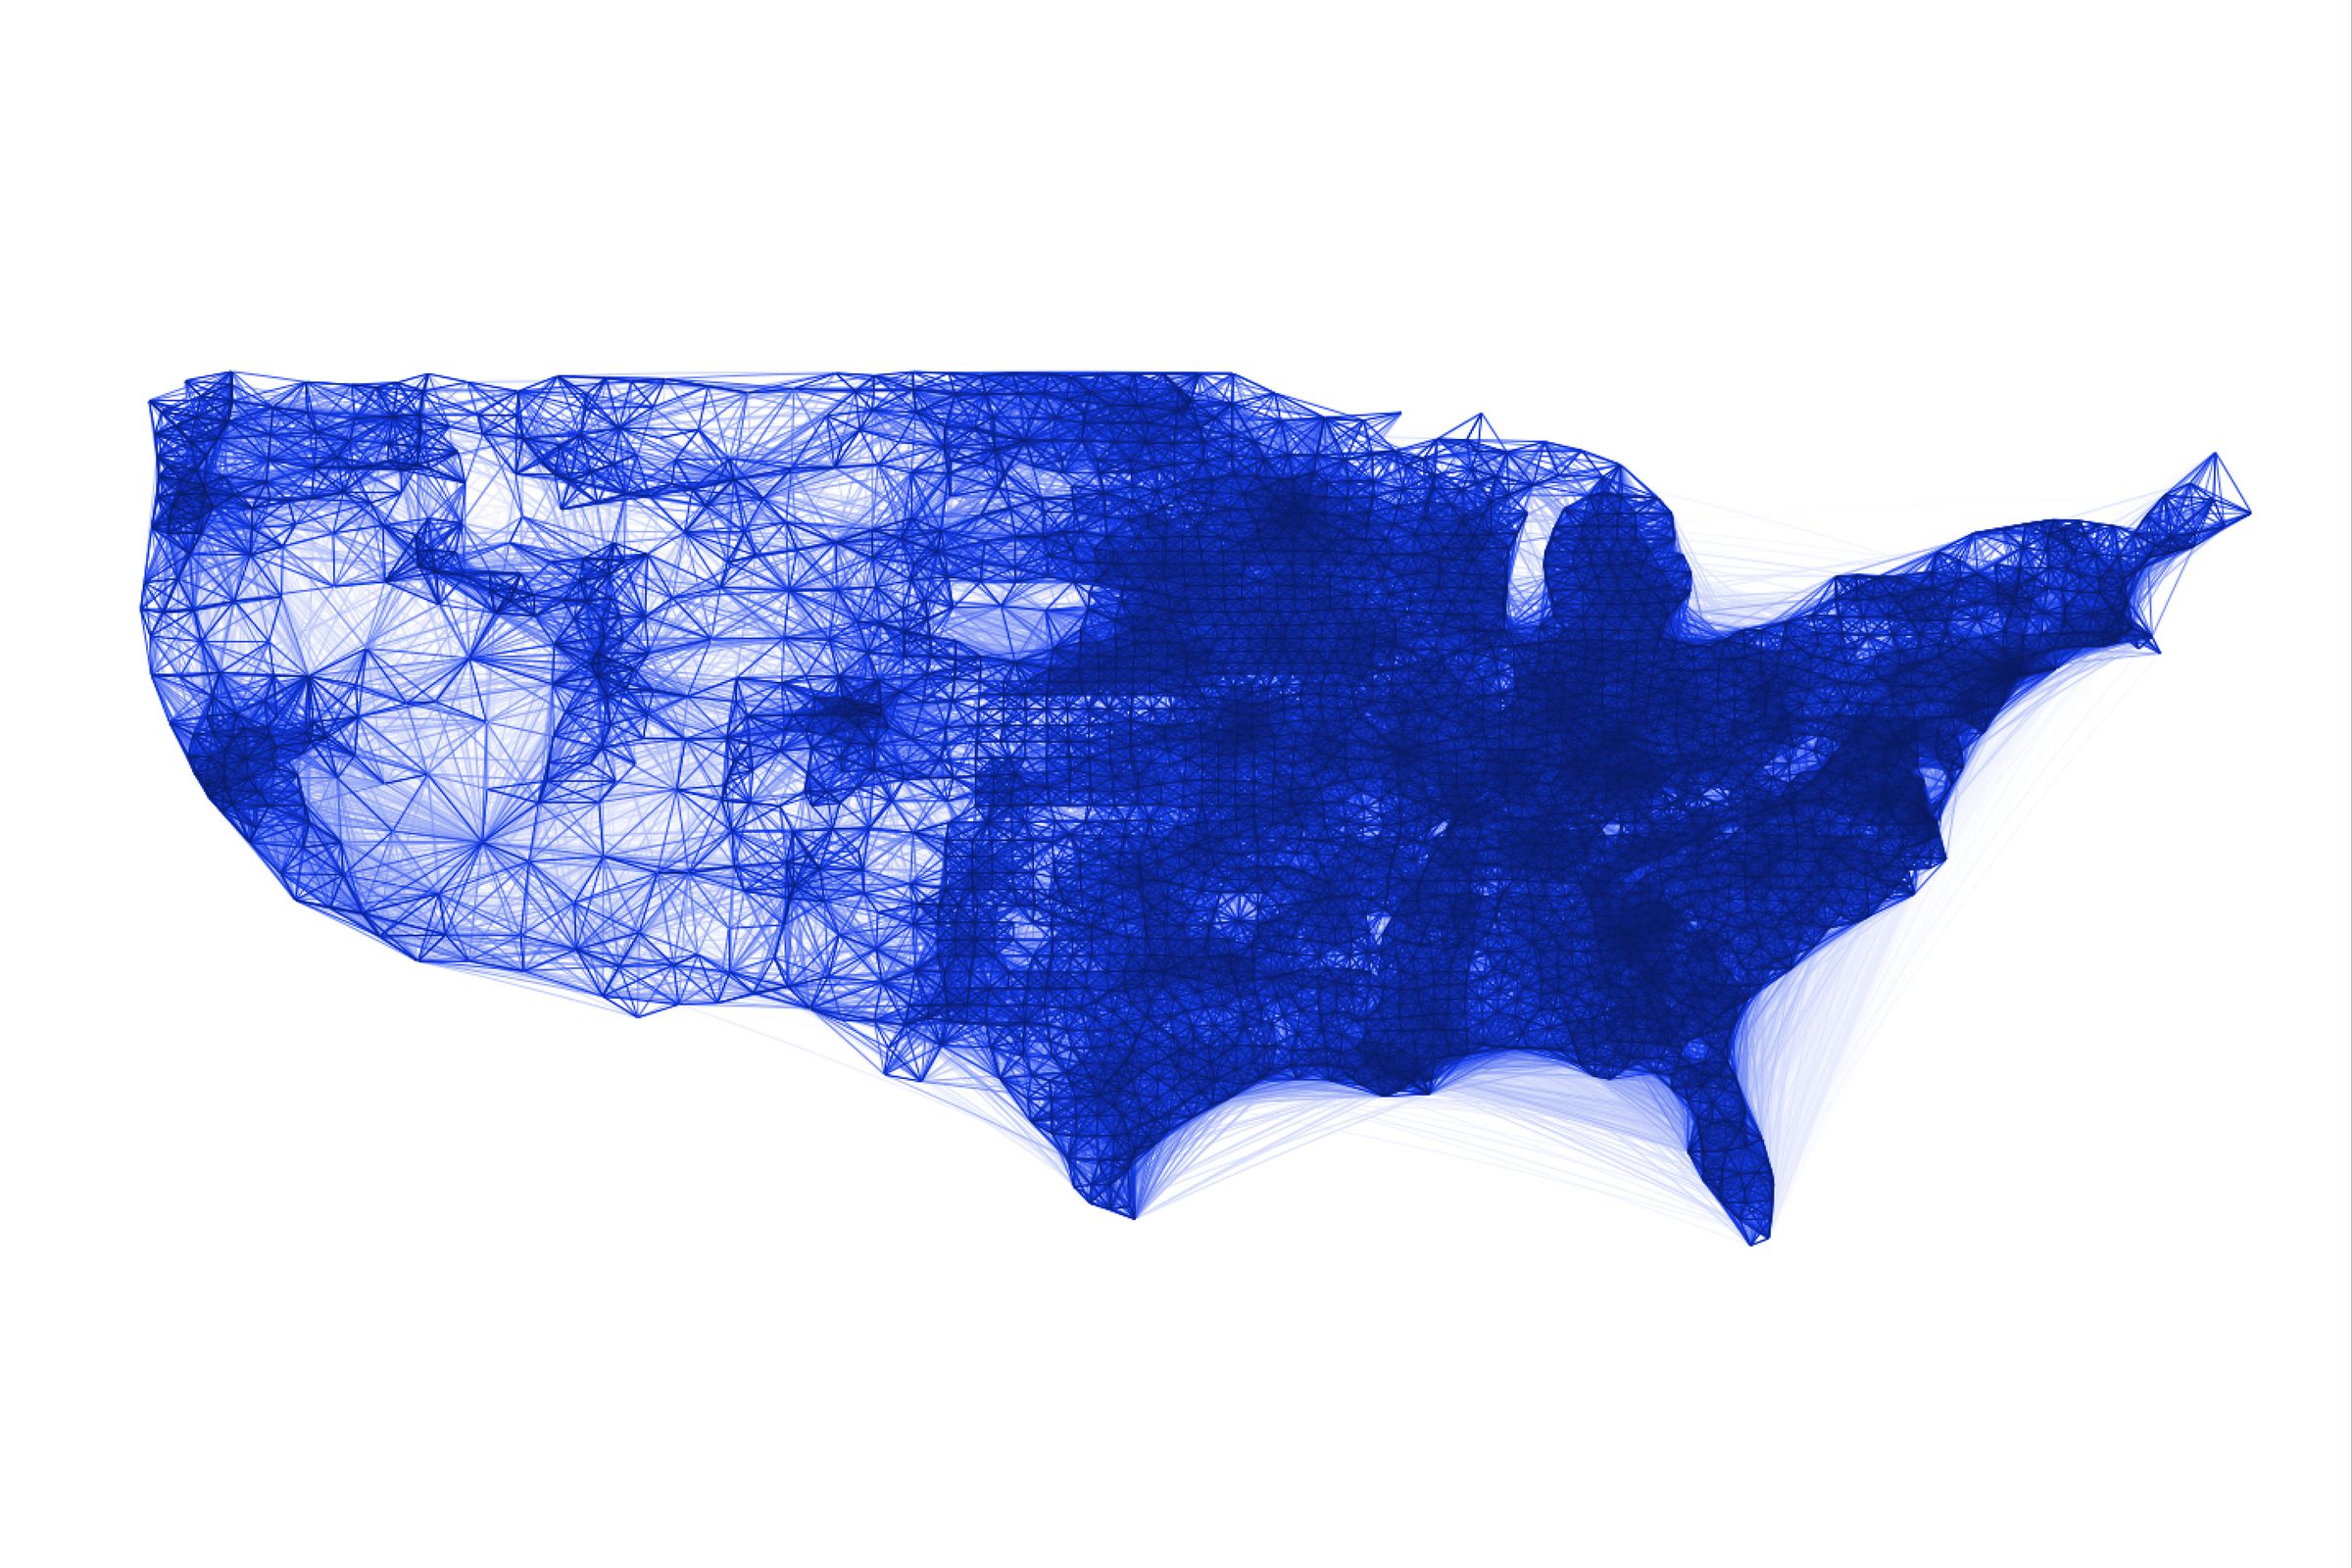 A Facebook co-location map for the United States. It could help illustrate the likeliness of the disease to spread.